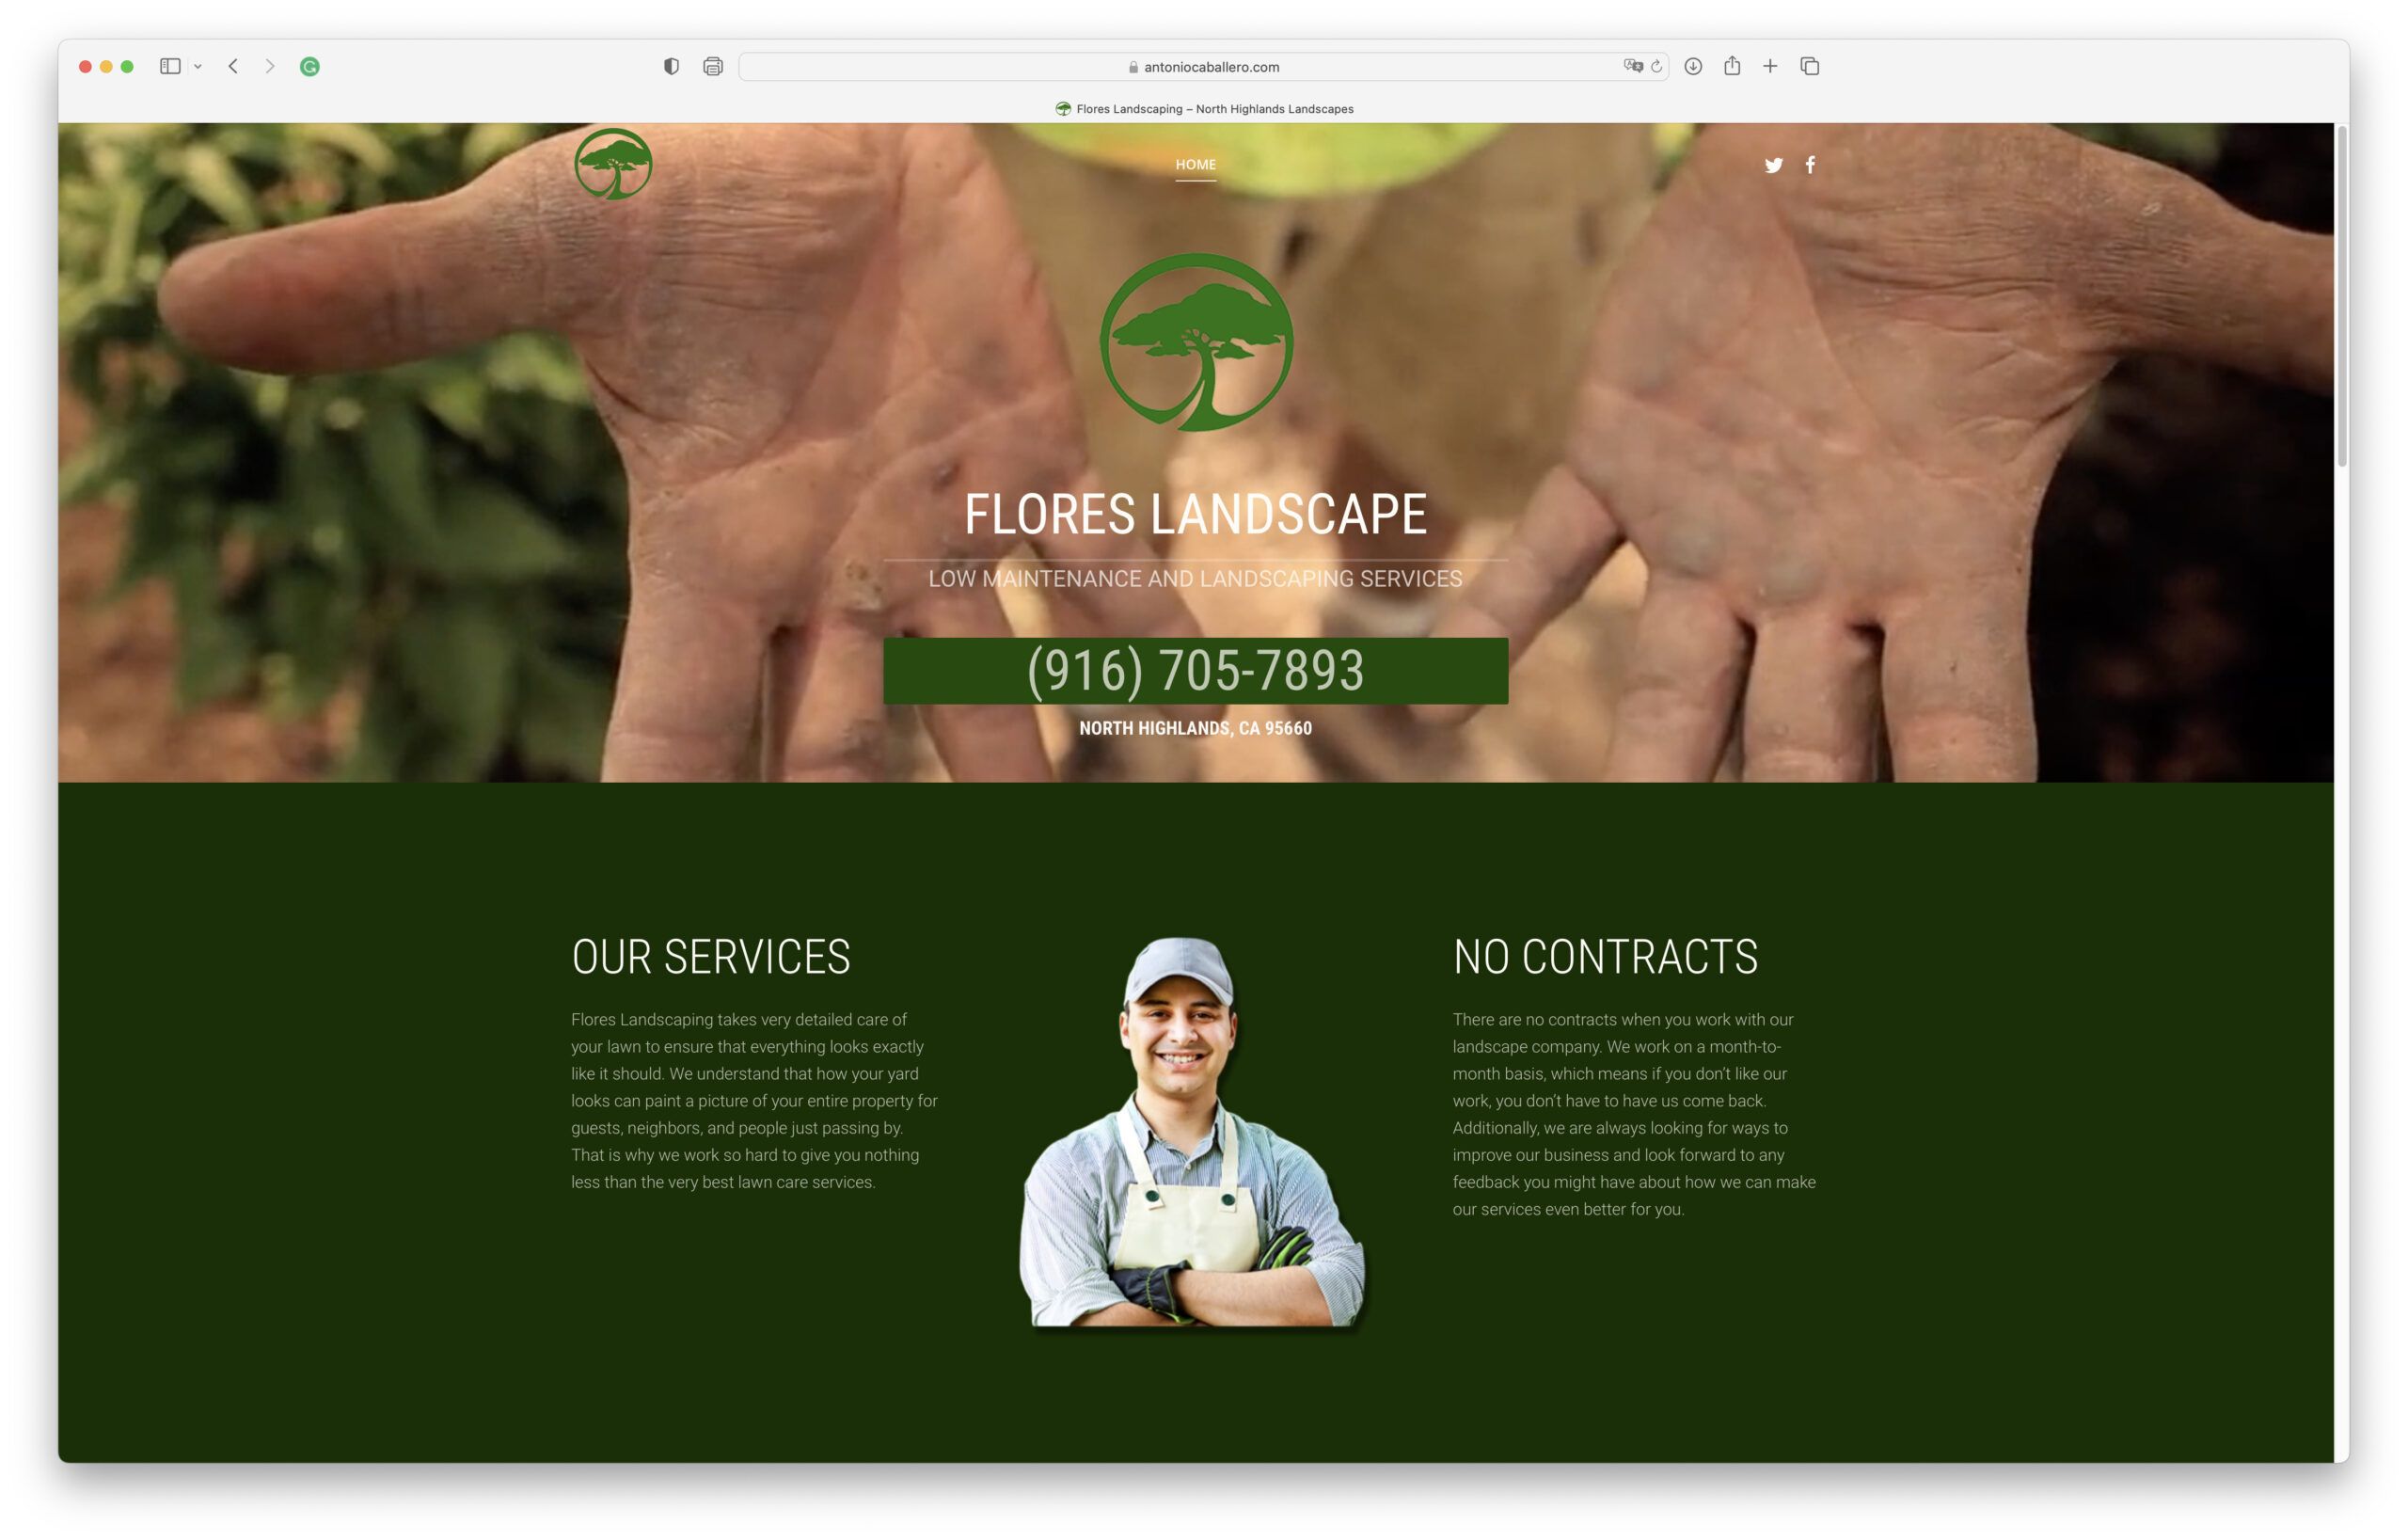 FLORES LANDSCAPING Landing page